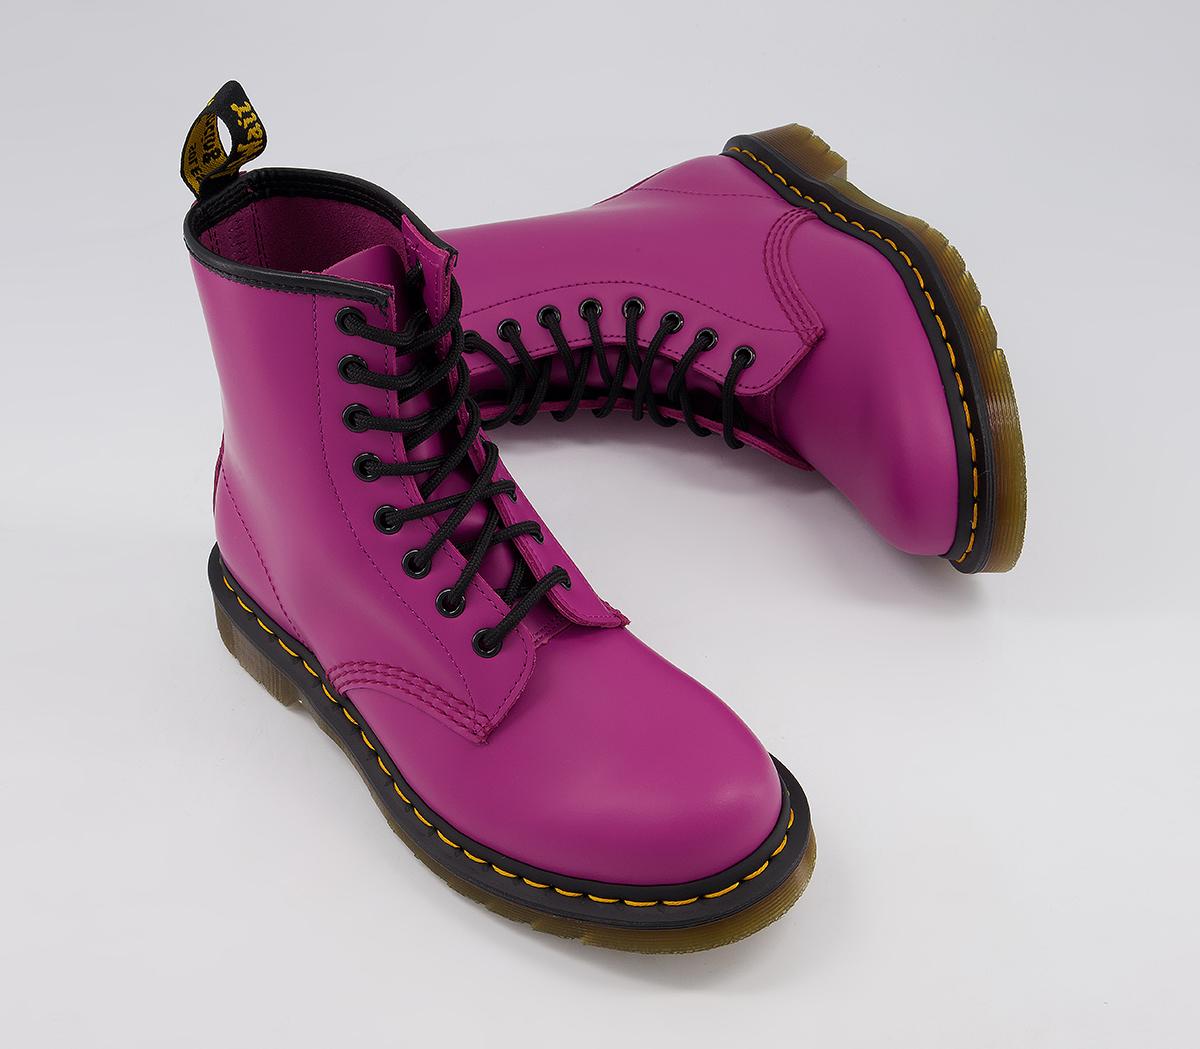 Dr. Martens 8 Eyelet Lace Up Boots Fuchsia - Ankle Boots